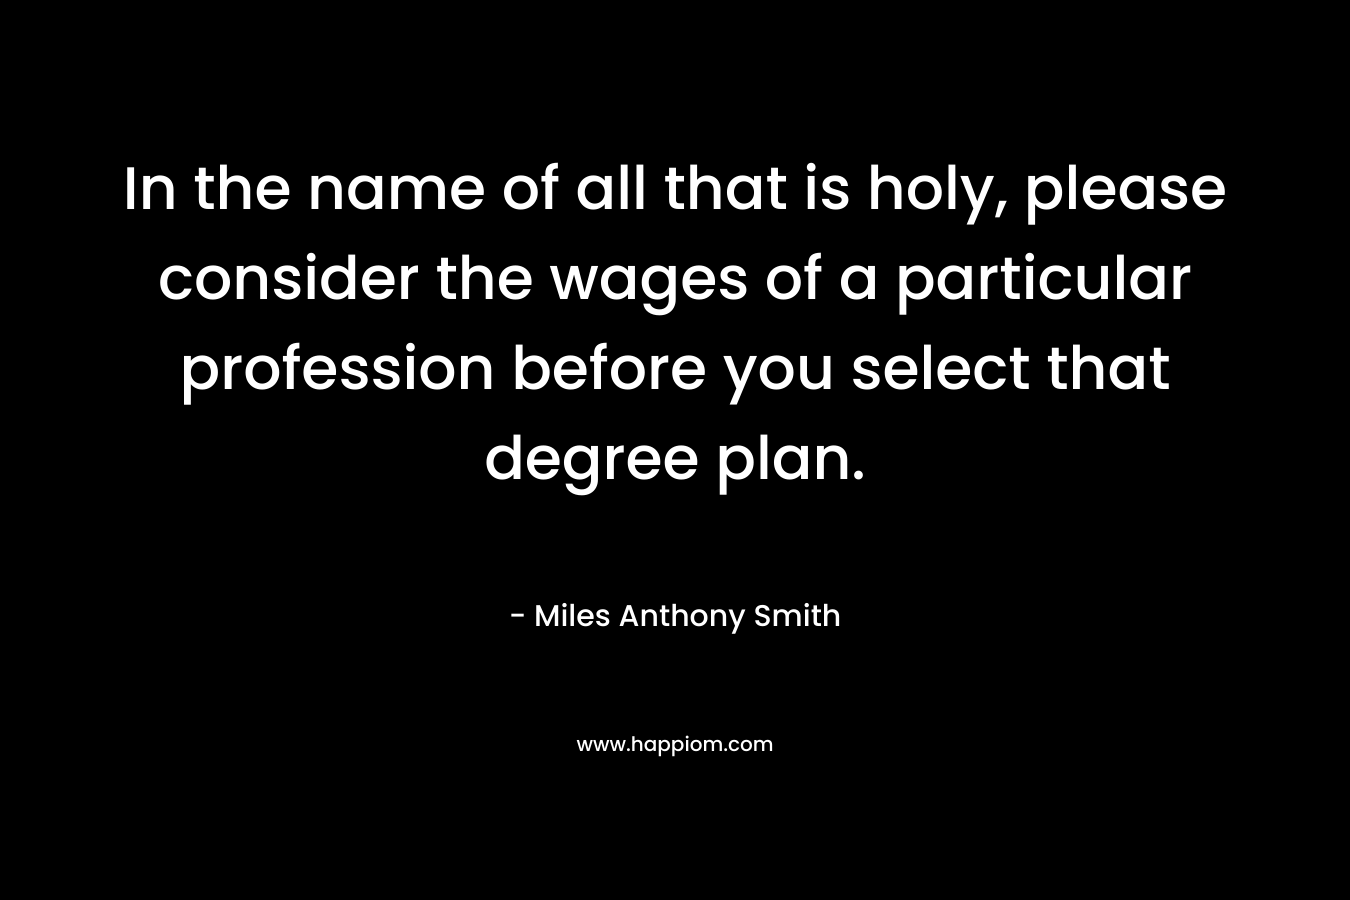 In the name of all that is holy, please consider the wages of a particular profession before you select that degree plan. – Miles Anthony Smith